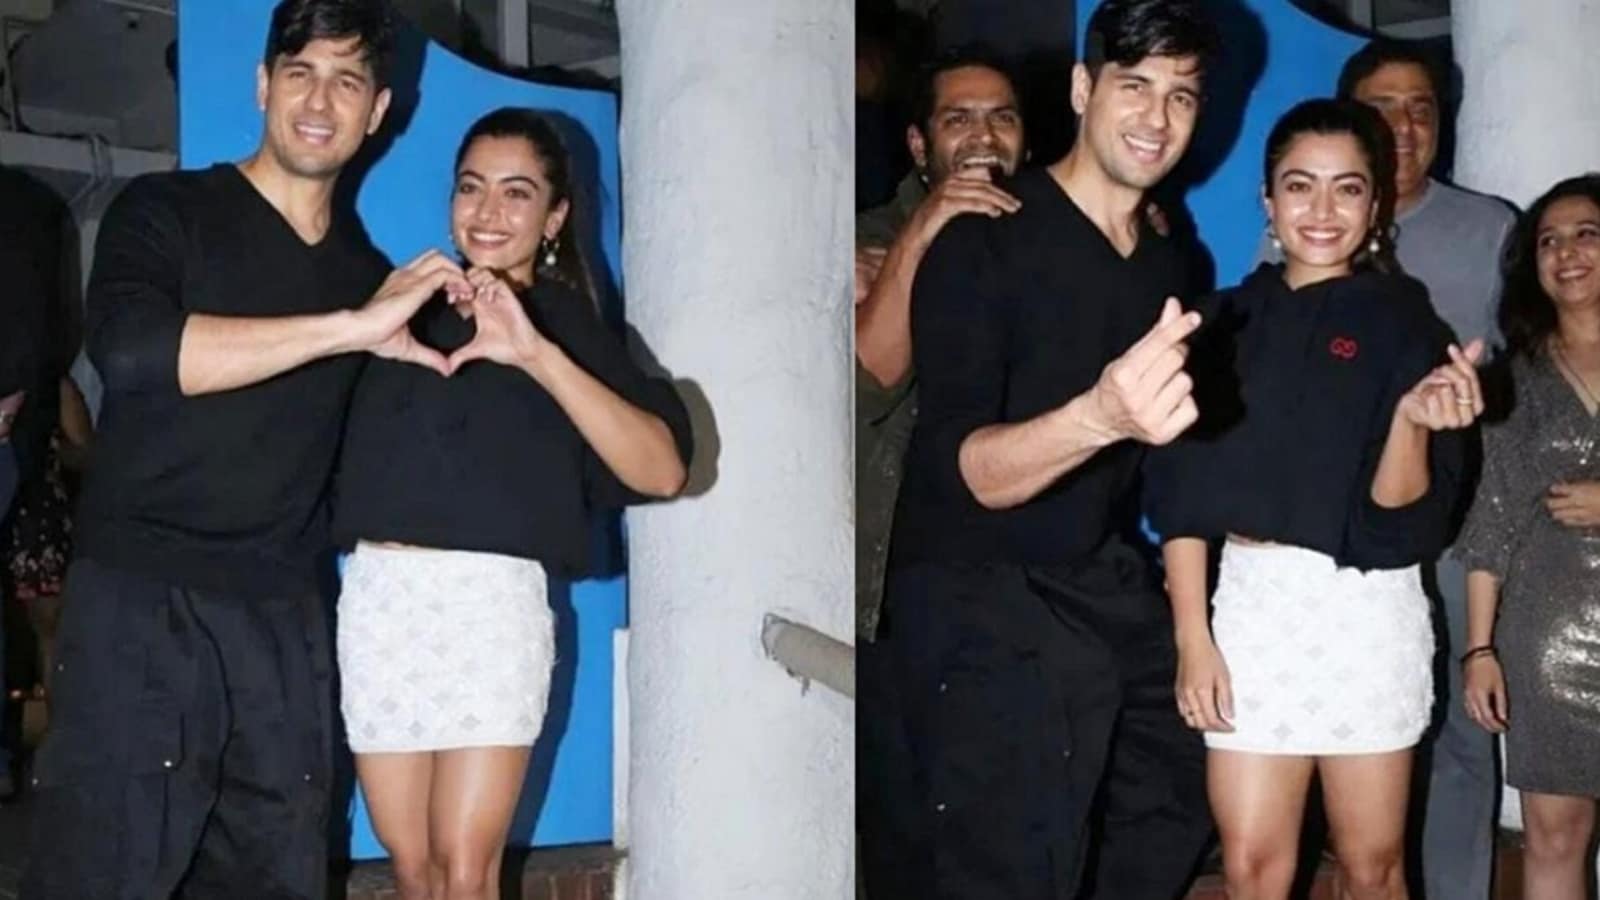 Rashmika Mandanna, Sidharth Malhotra are all smiles as they occasion collectively at Mission Majnu bash. Watch